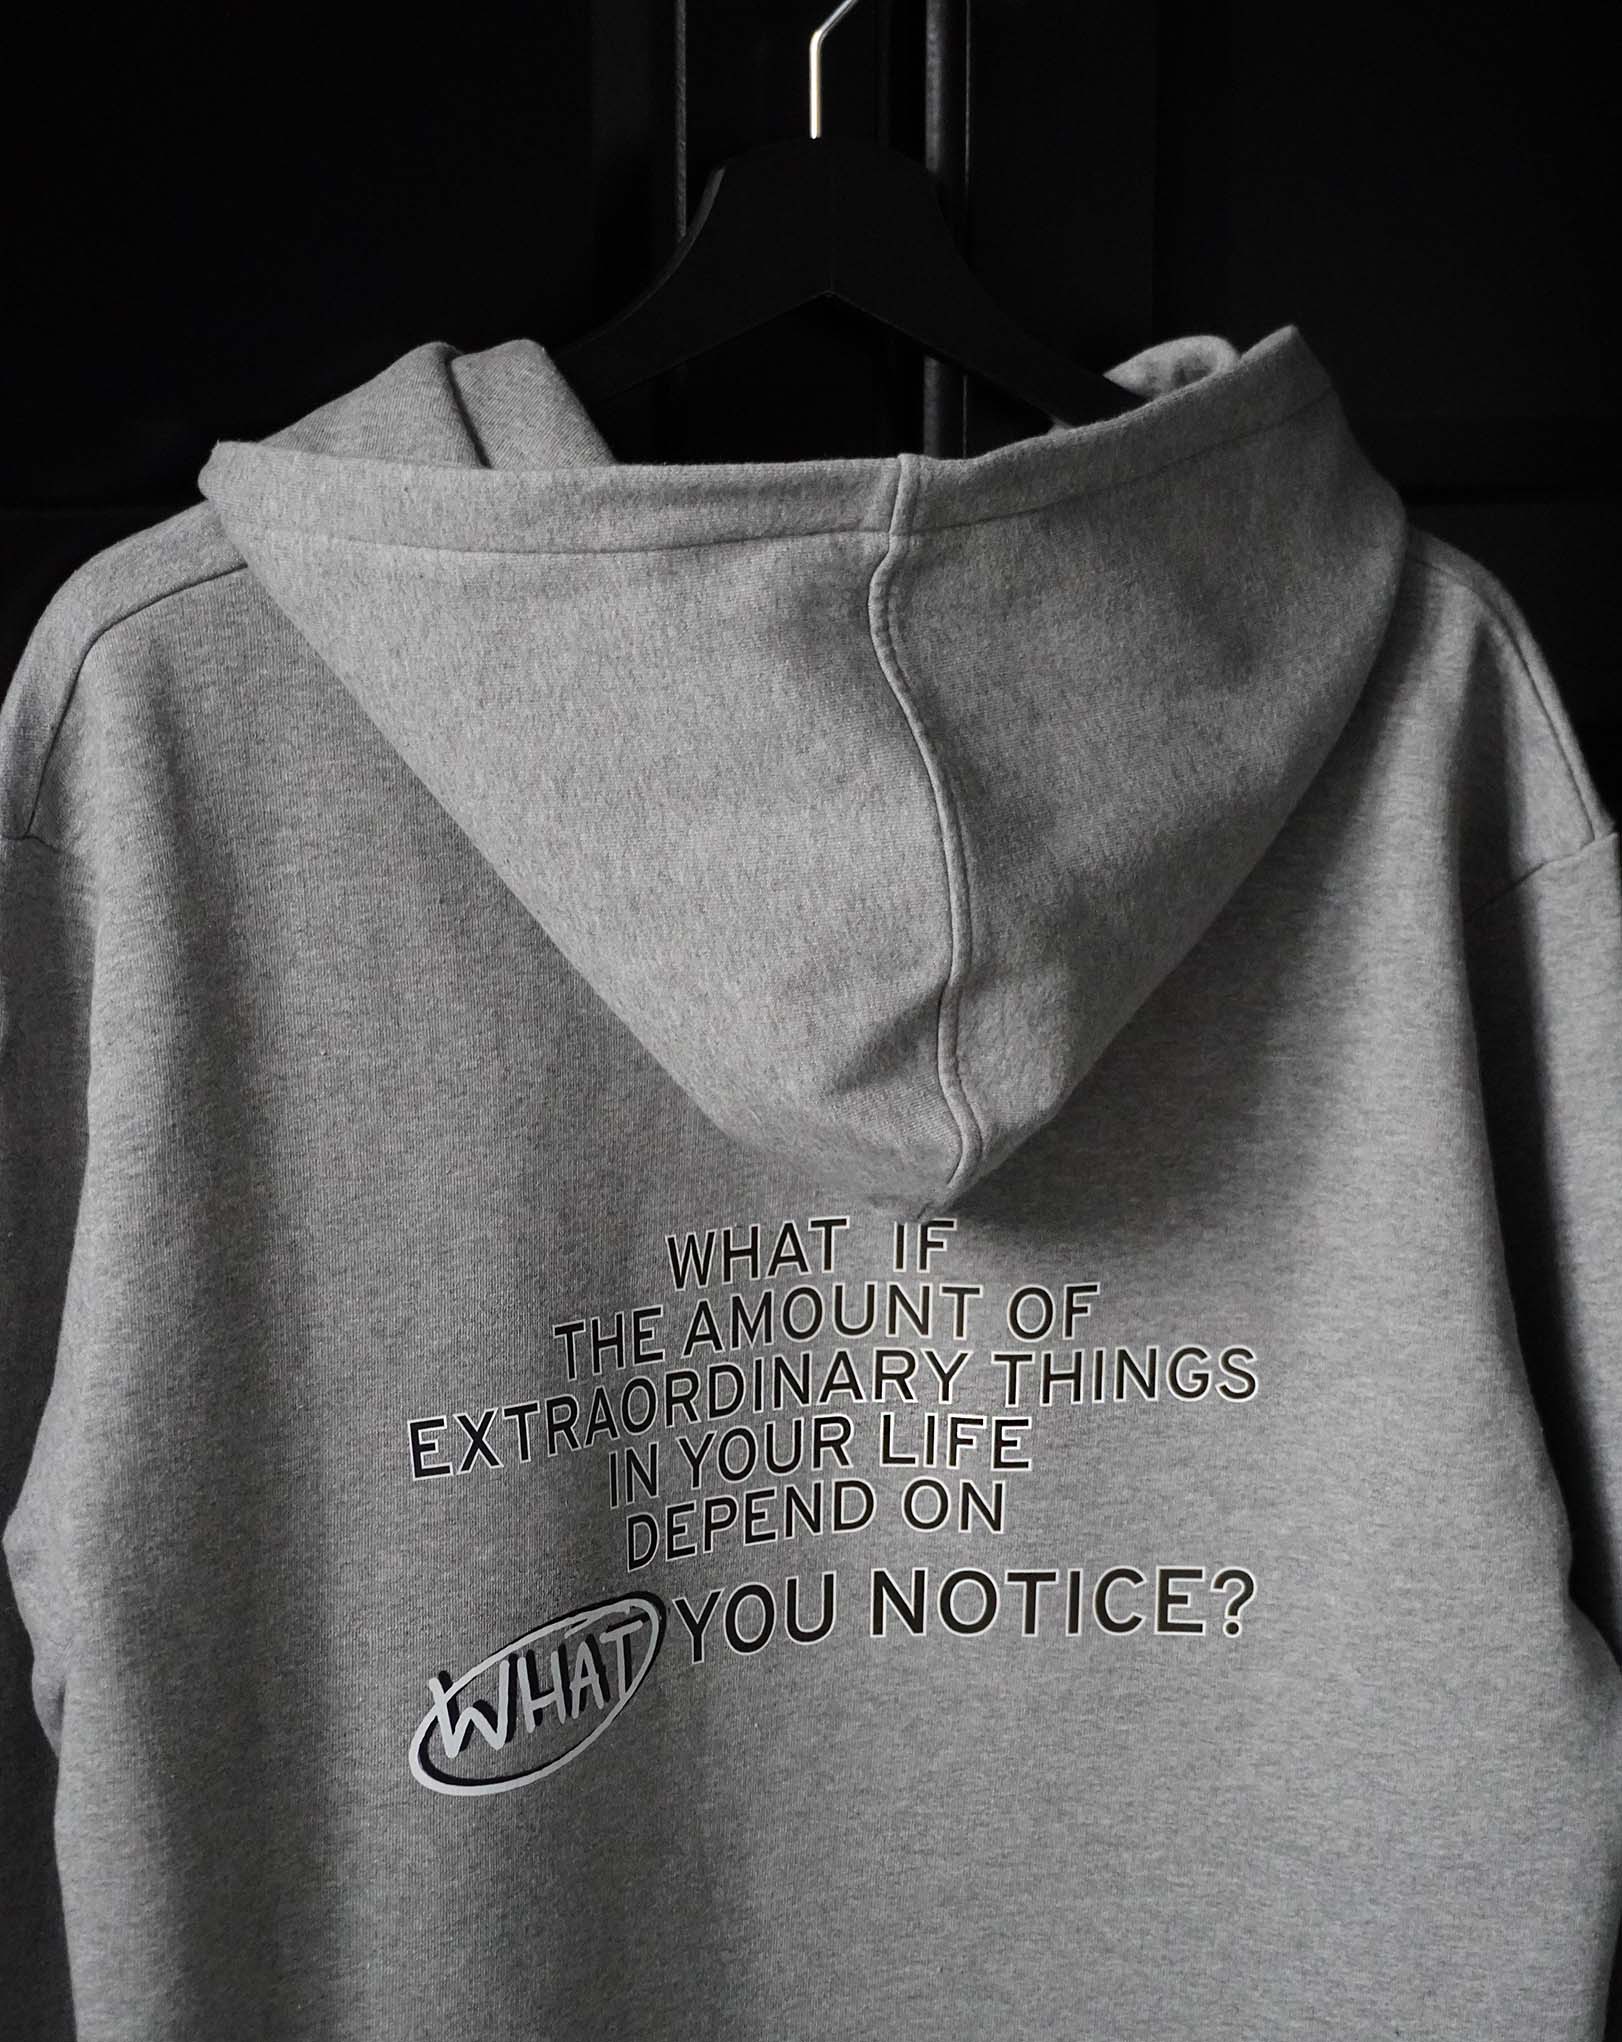 What if the amount of extraordinary things in your life depend on what you notice? Grey Hoodie - OBLIVIOUS?